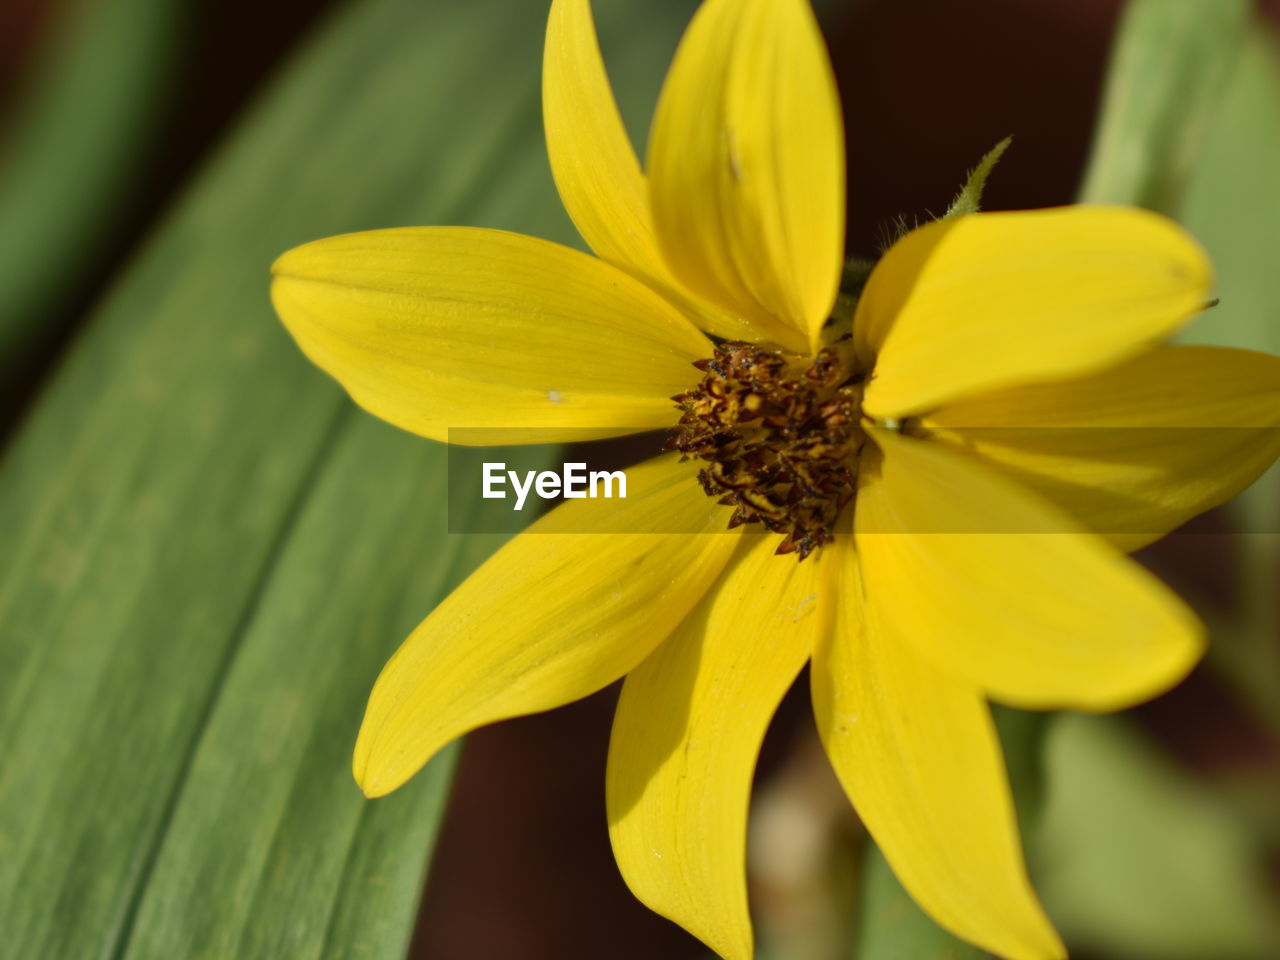 CLOSE-UP OF YELLOW FLOWER ON LEAF